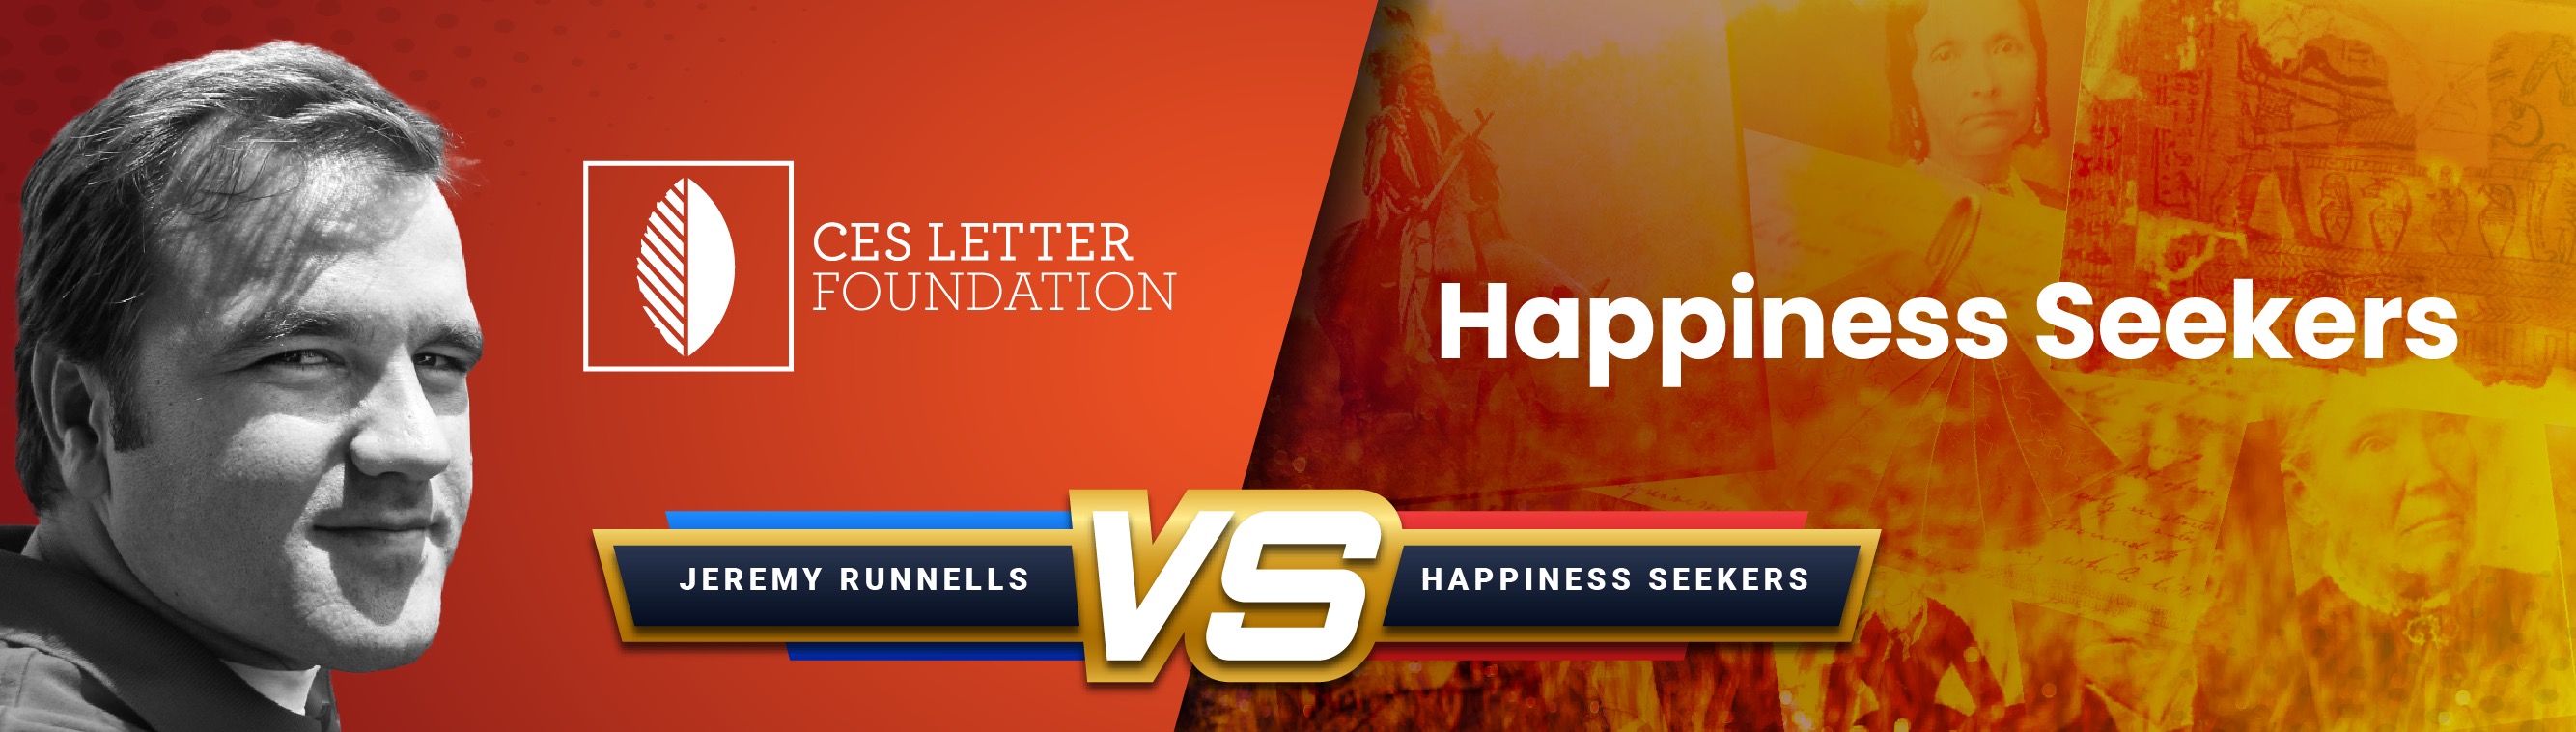 CES Letter vs. Happiness Seekers